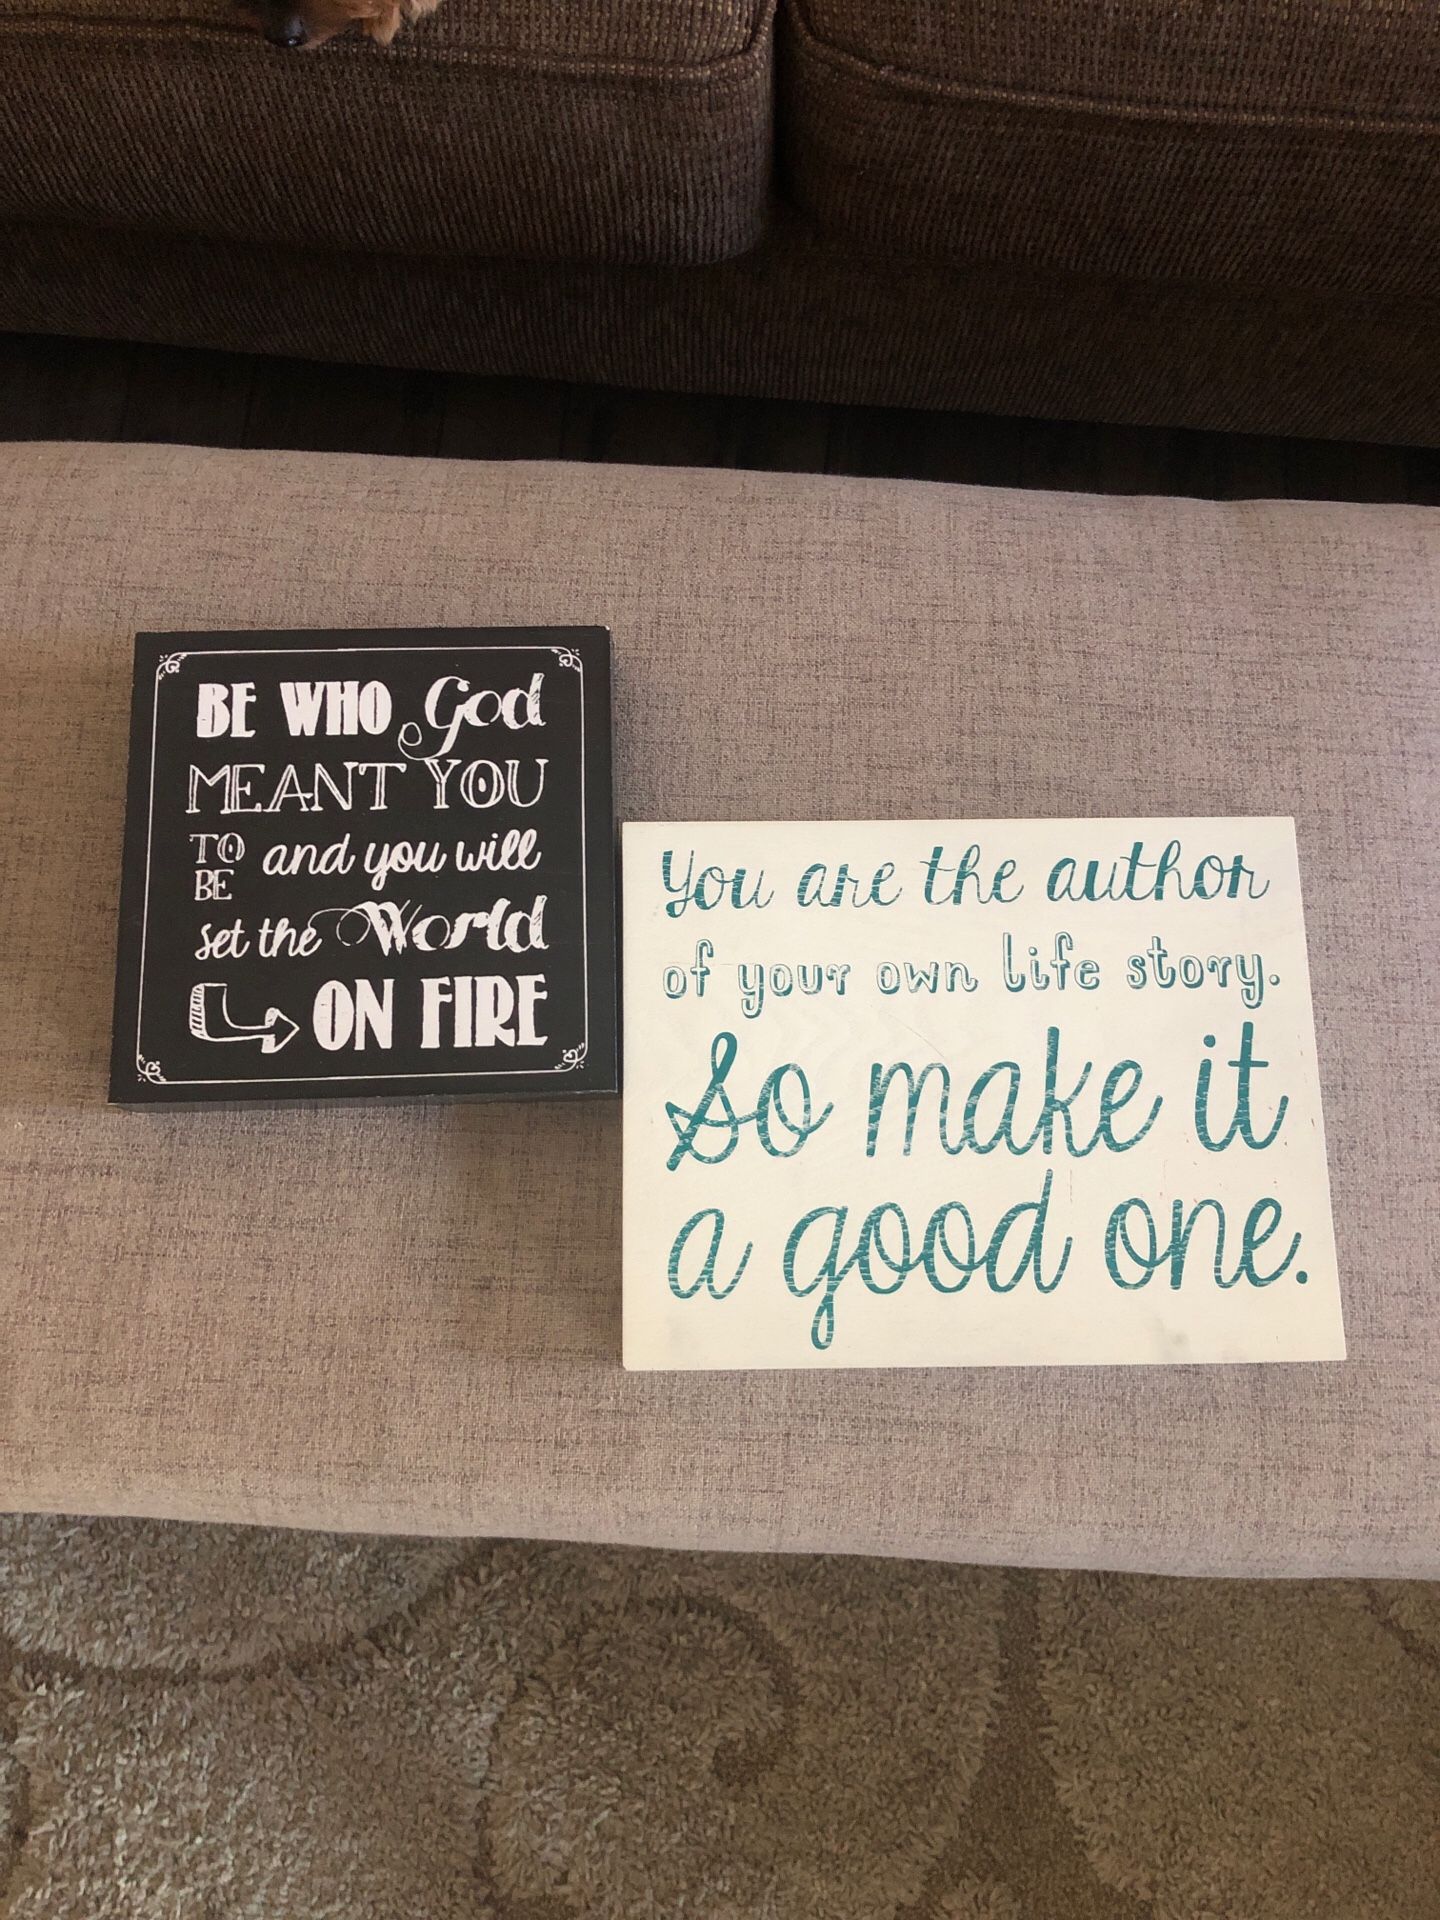 Small wall plaques or for shelves